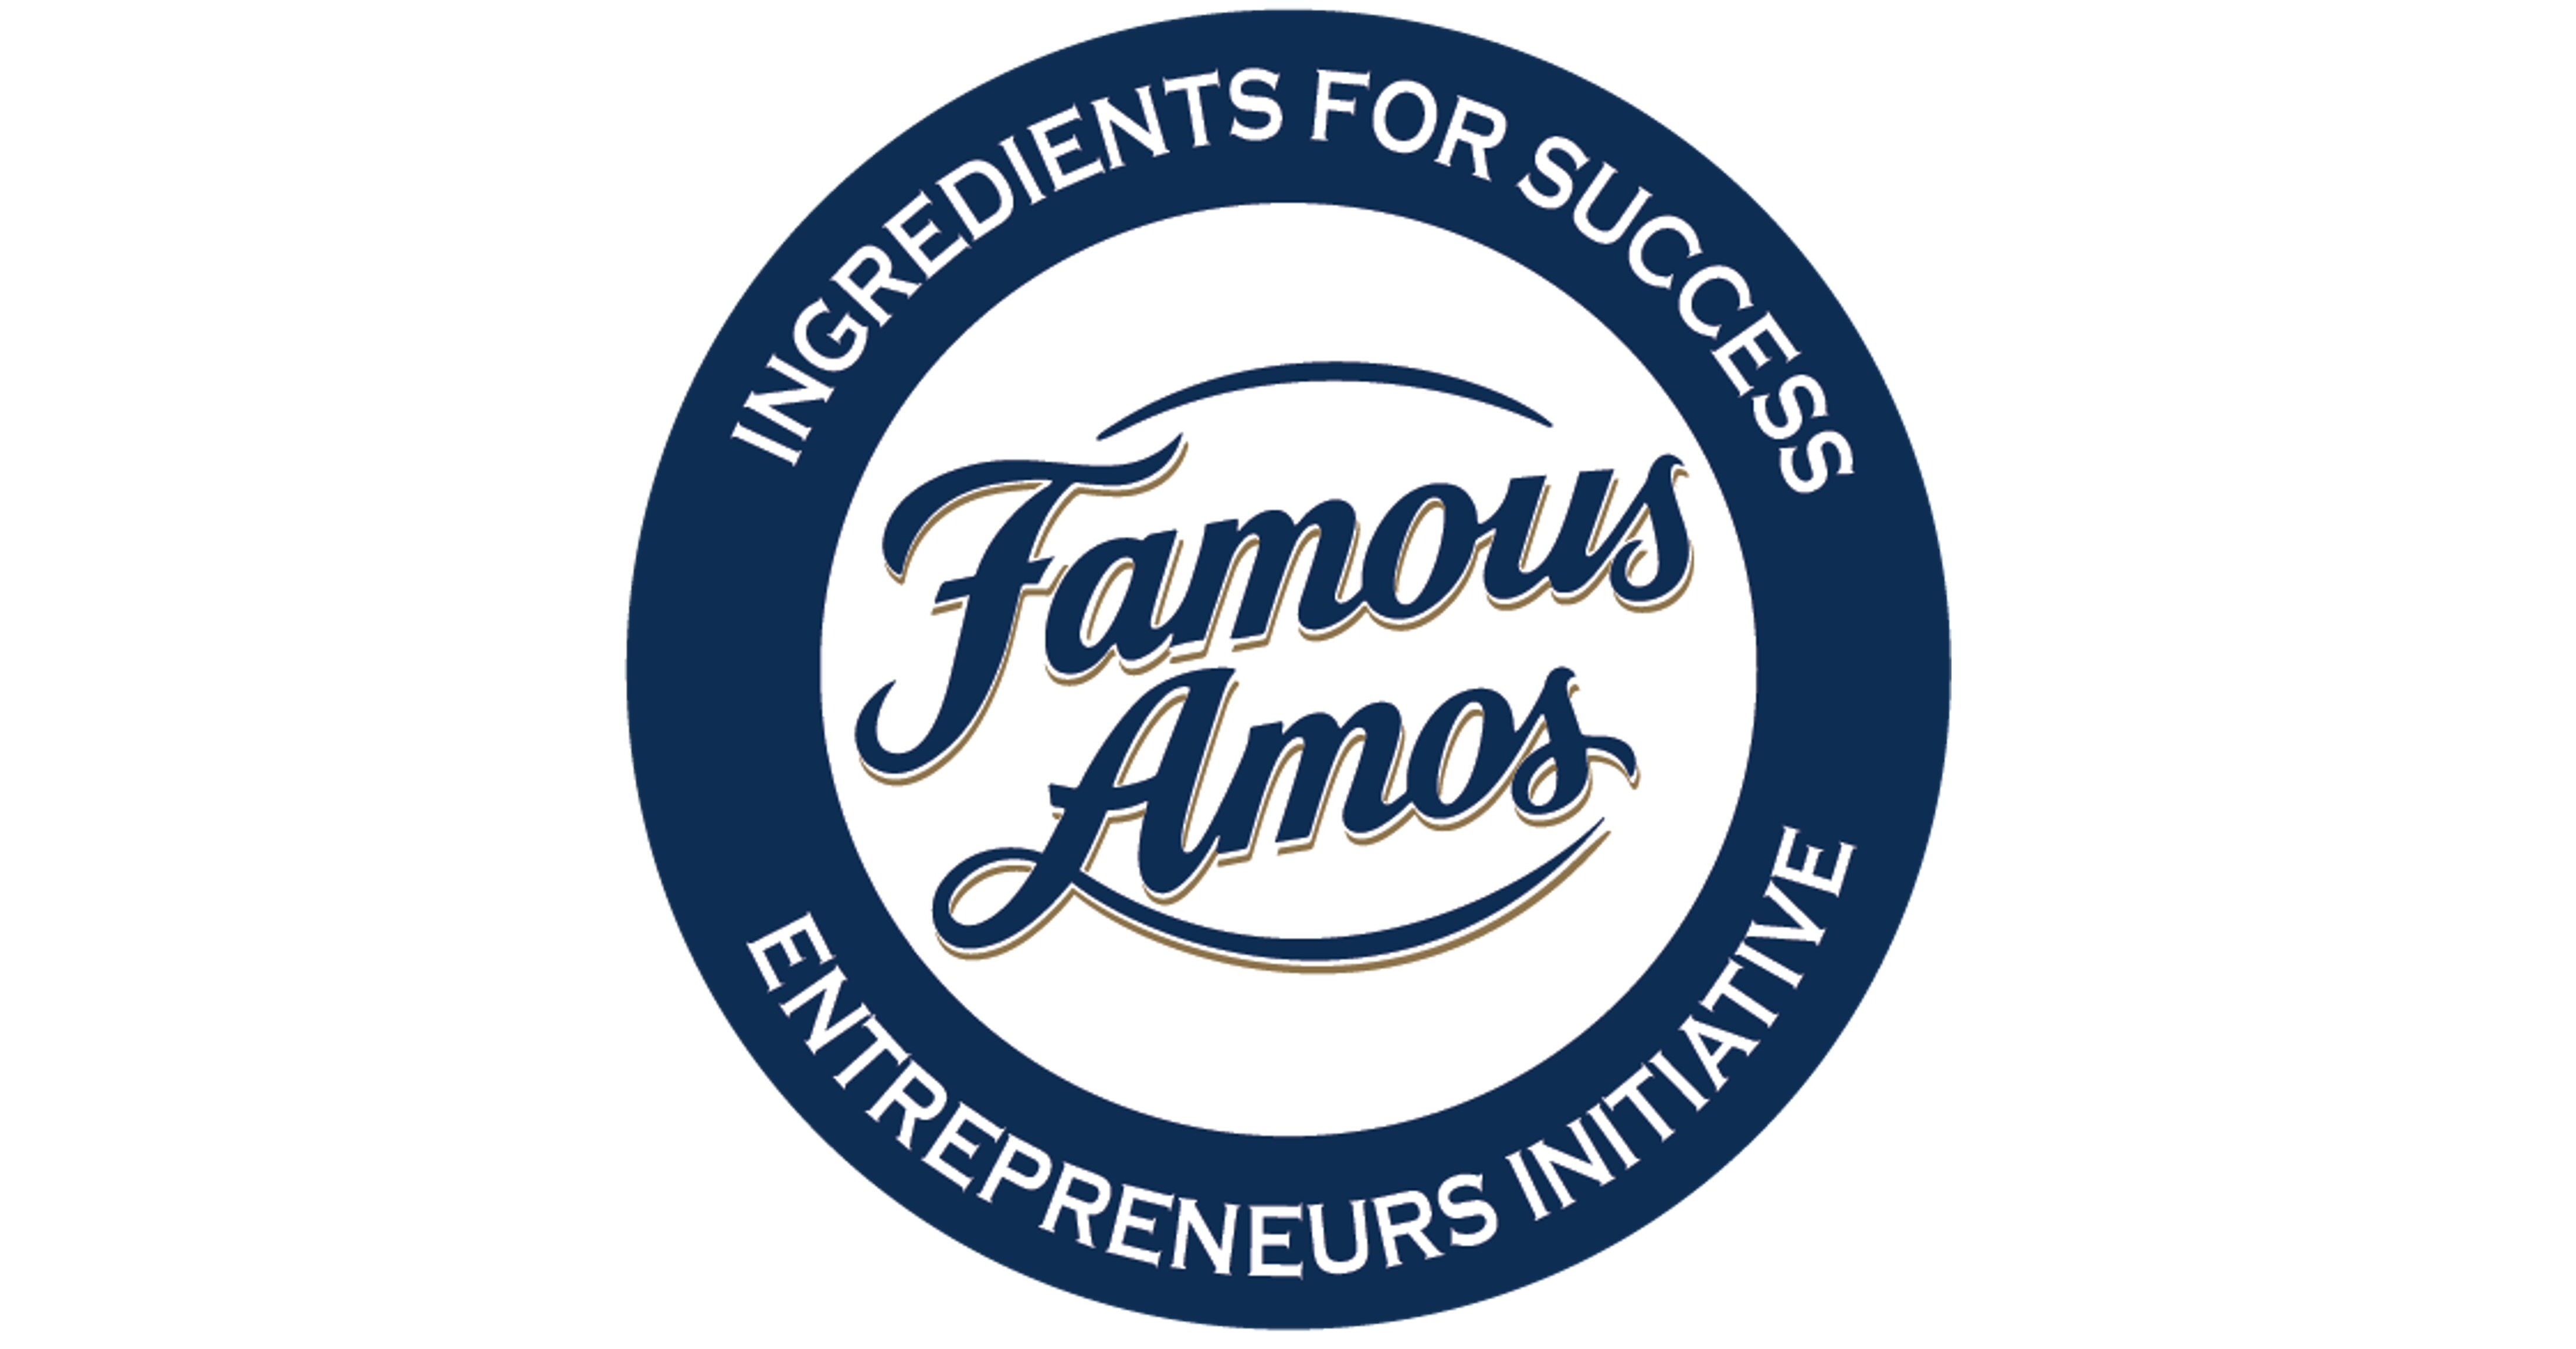 Famous Amos launches nationwide search to award three young entrepreneurs 0,000